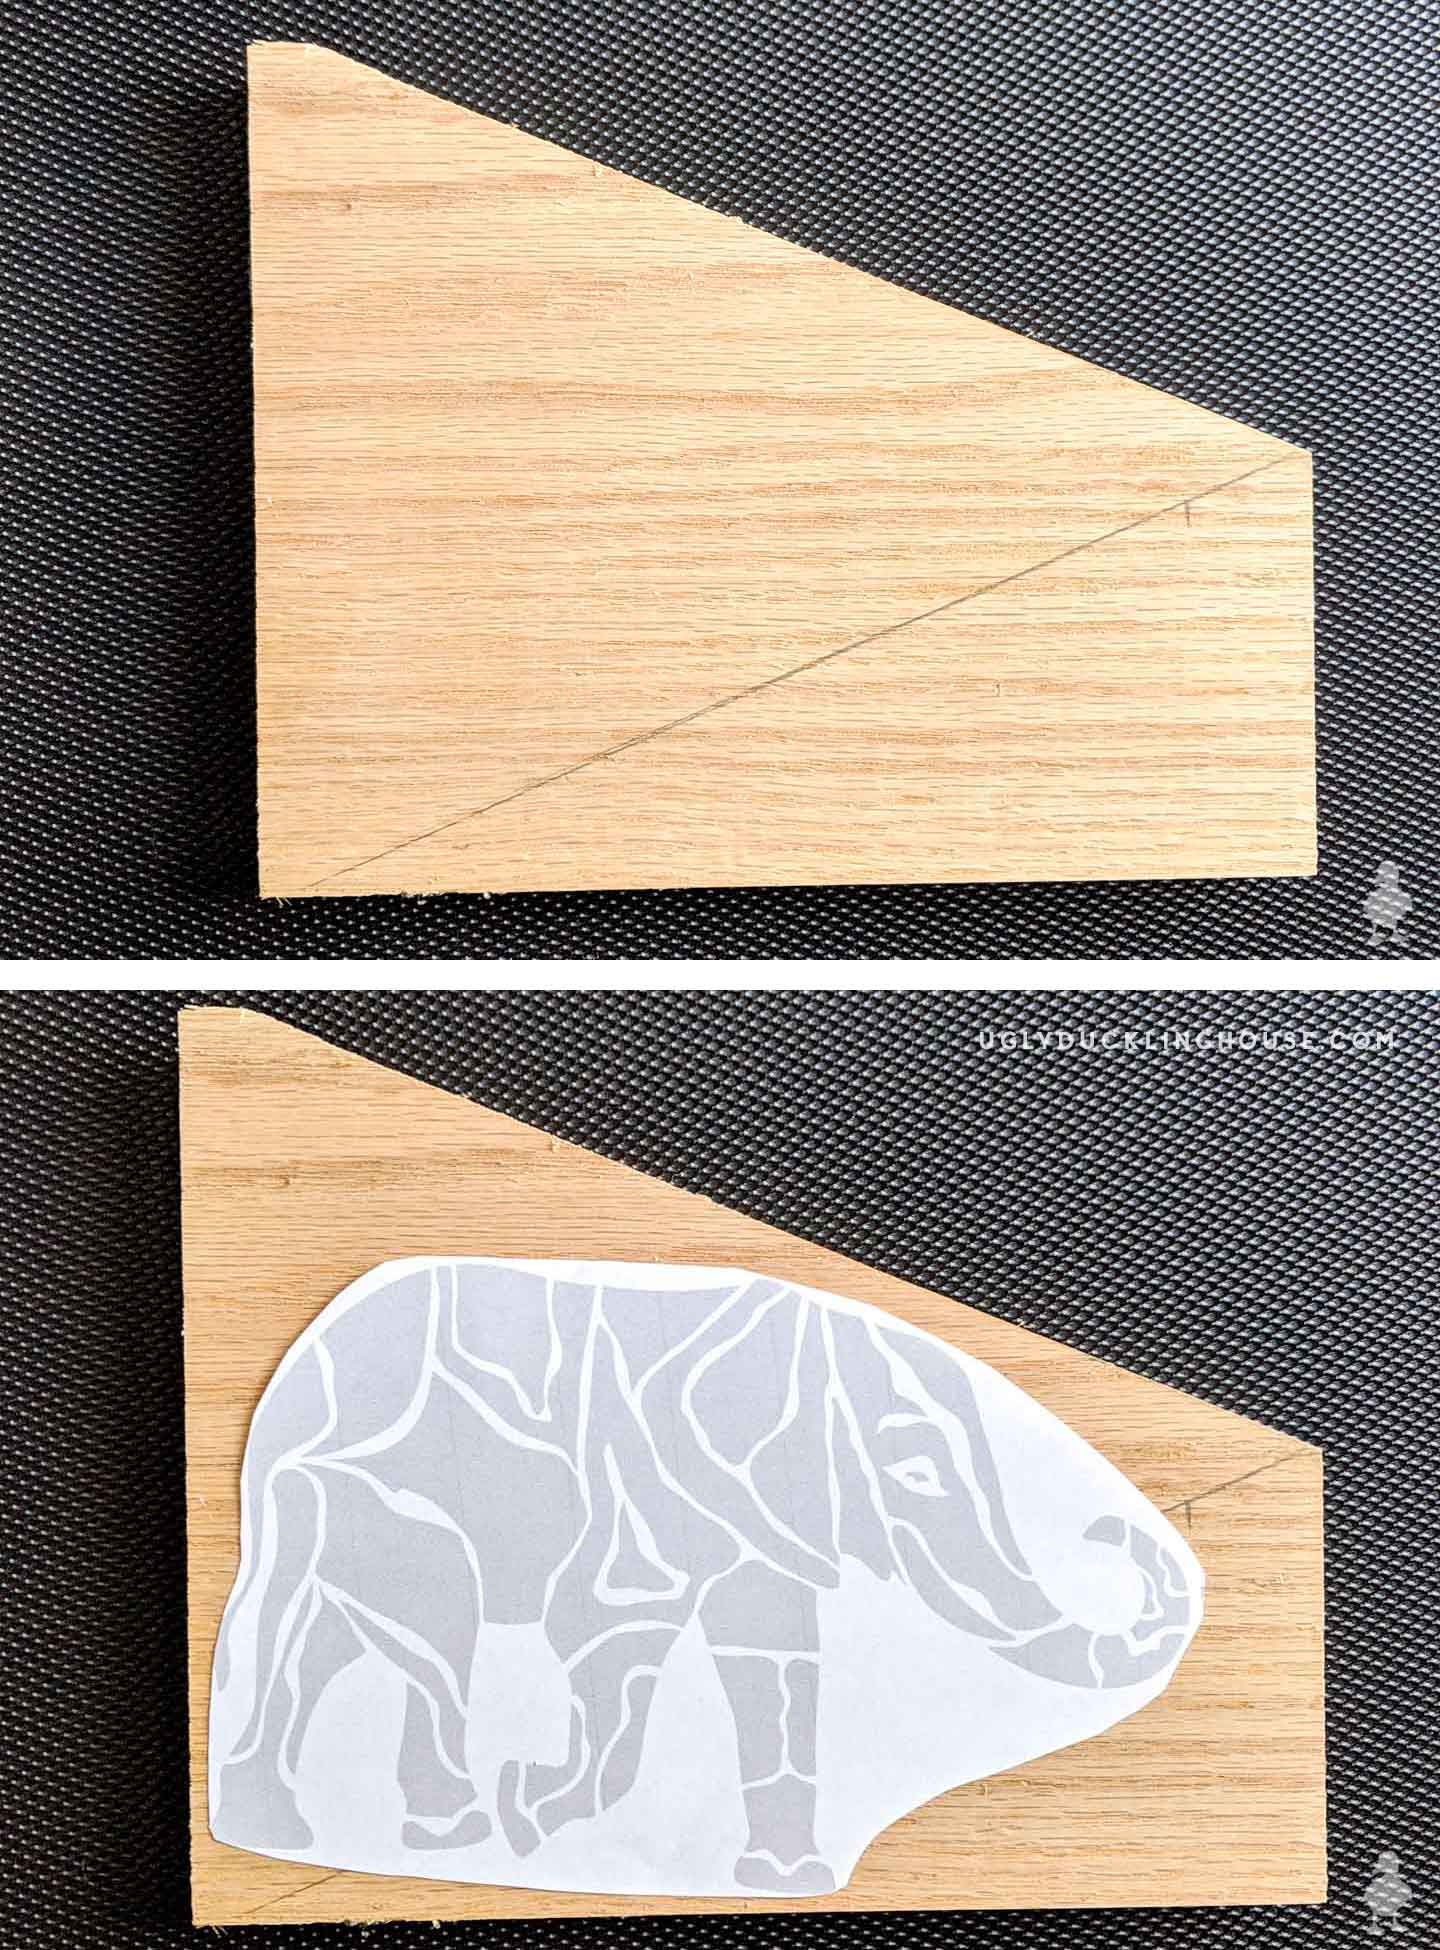 scrap wood and scroll saw image (sizing to fit)